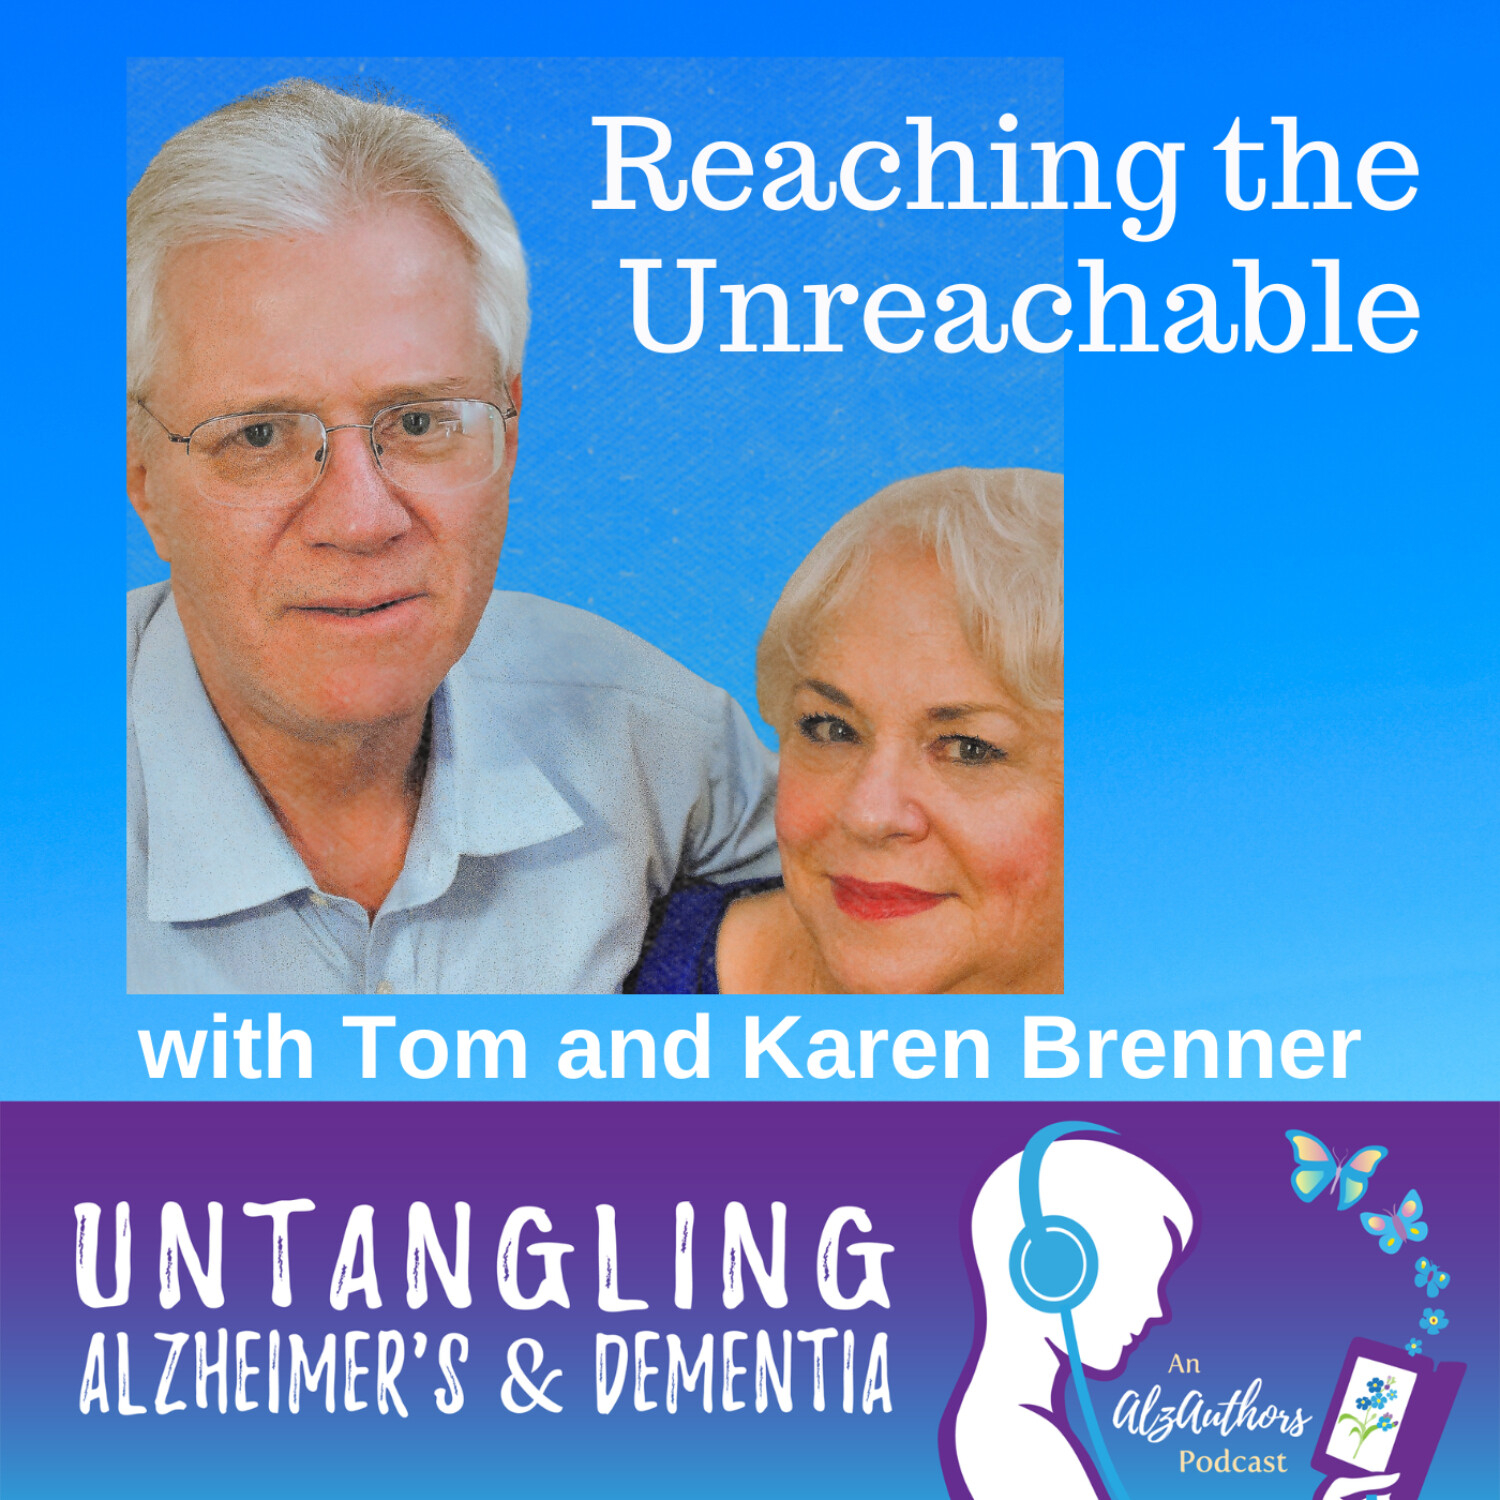 Tom and Karen Brenner Untangle Reaching the Unreachable